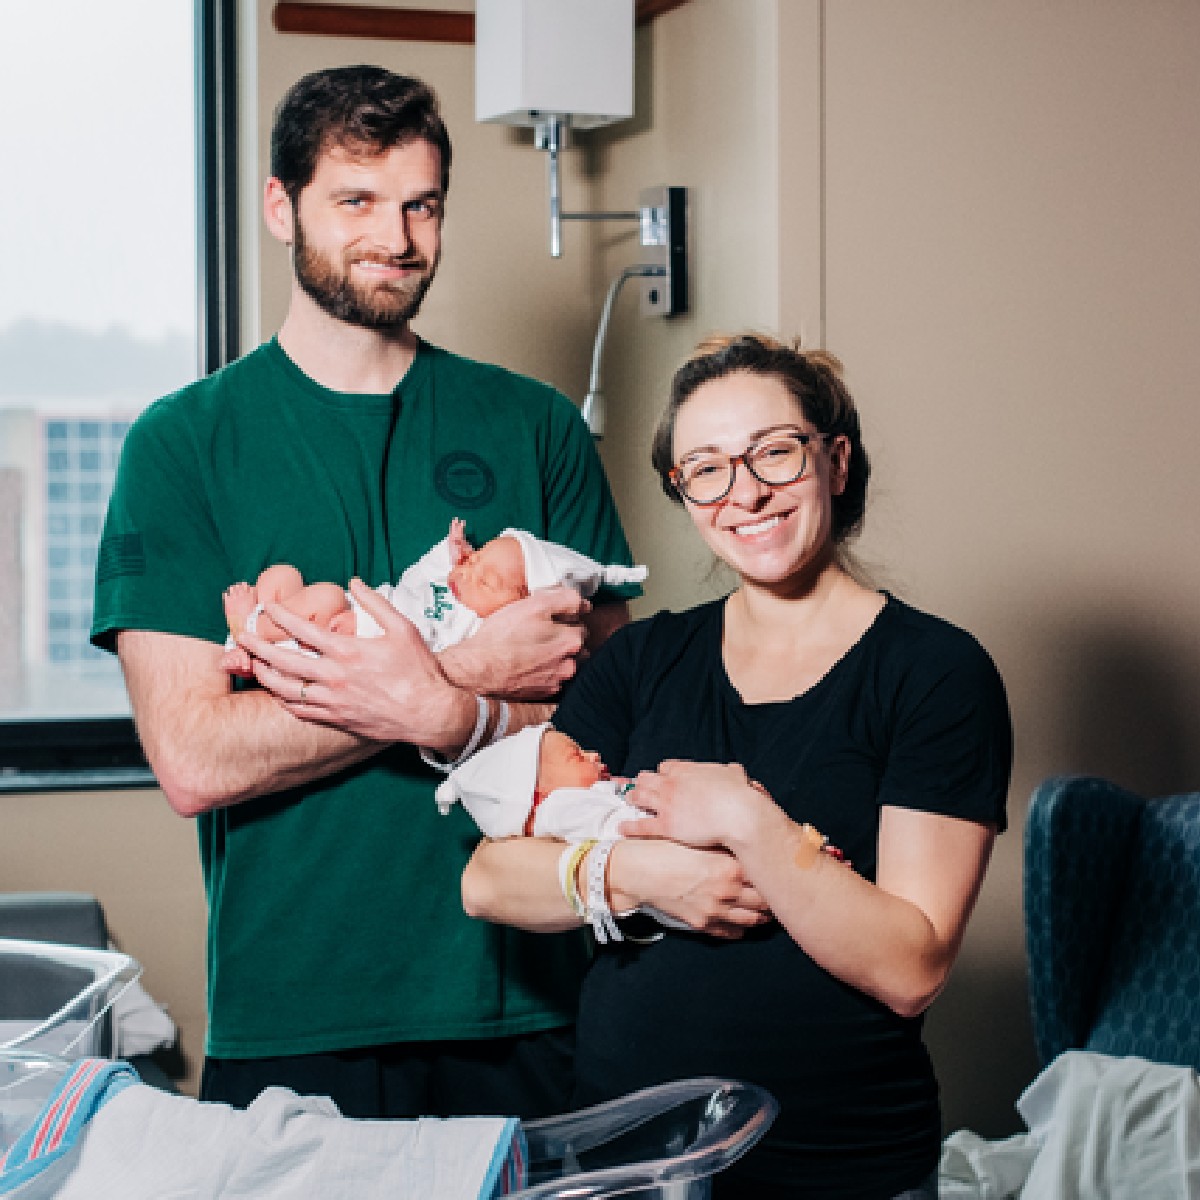 Meet Shellie Pascoe, a UAB Medicine patient with a rare double uterus who was pregnant with a baby in each—known as a #DicavitaryPregnancy, a condition estimated to occur in only one in a million pregnancies in women with a double uterus. brnw.ch/21wJdJl